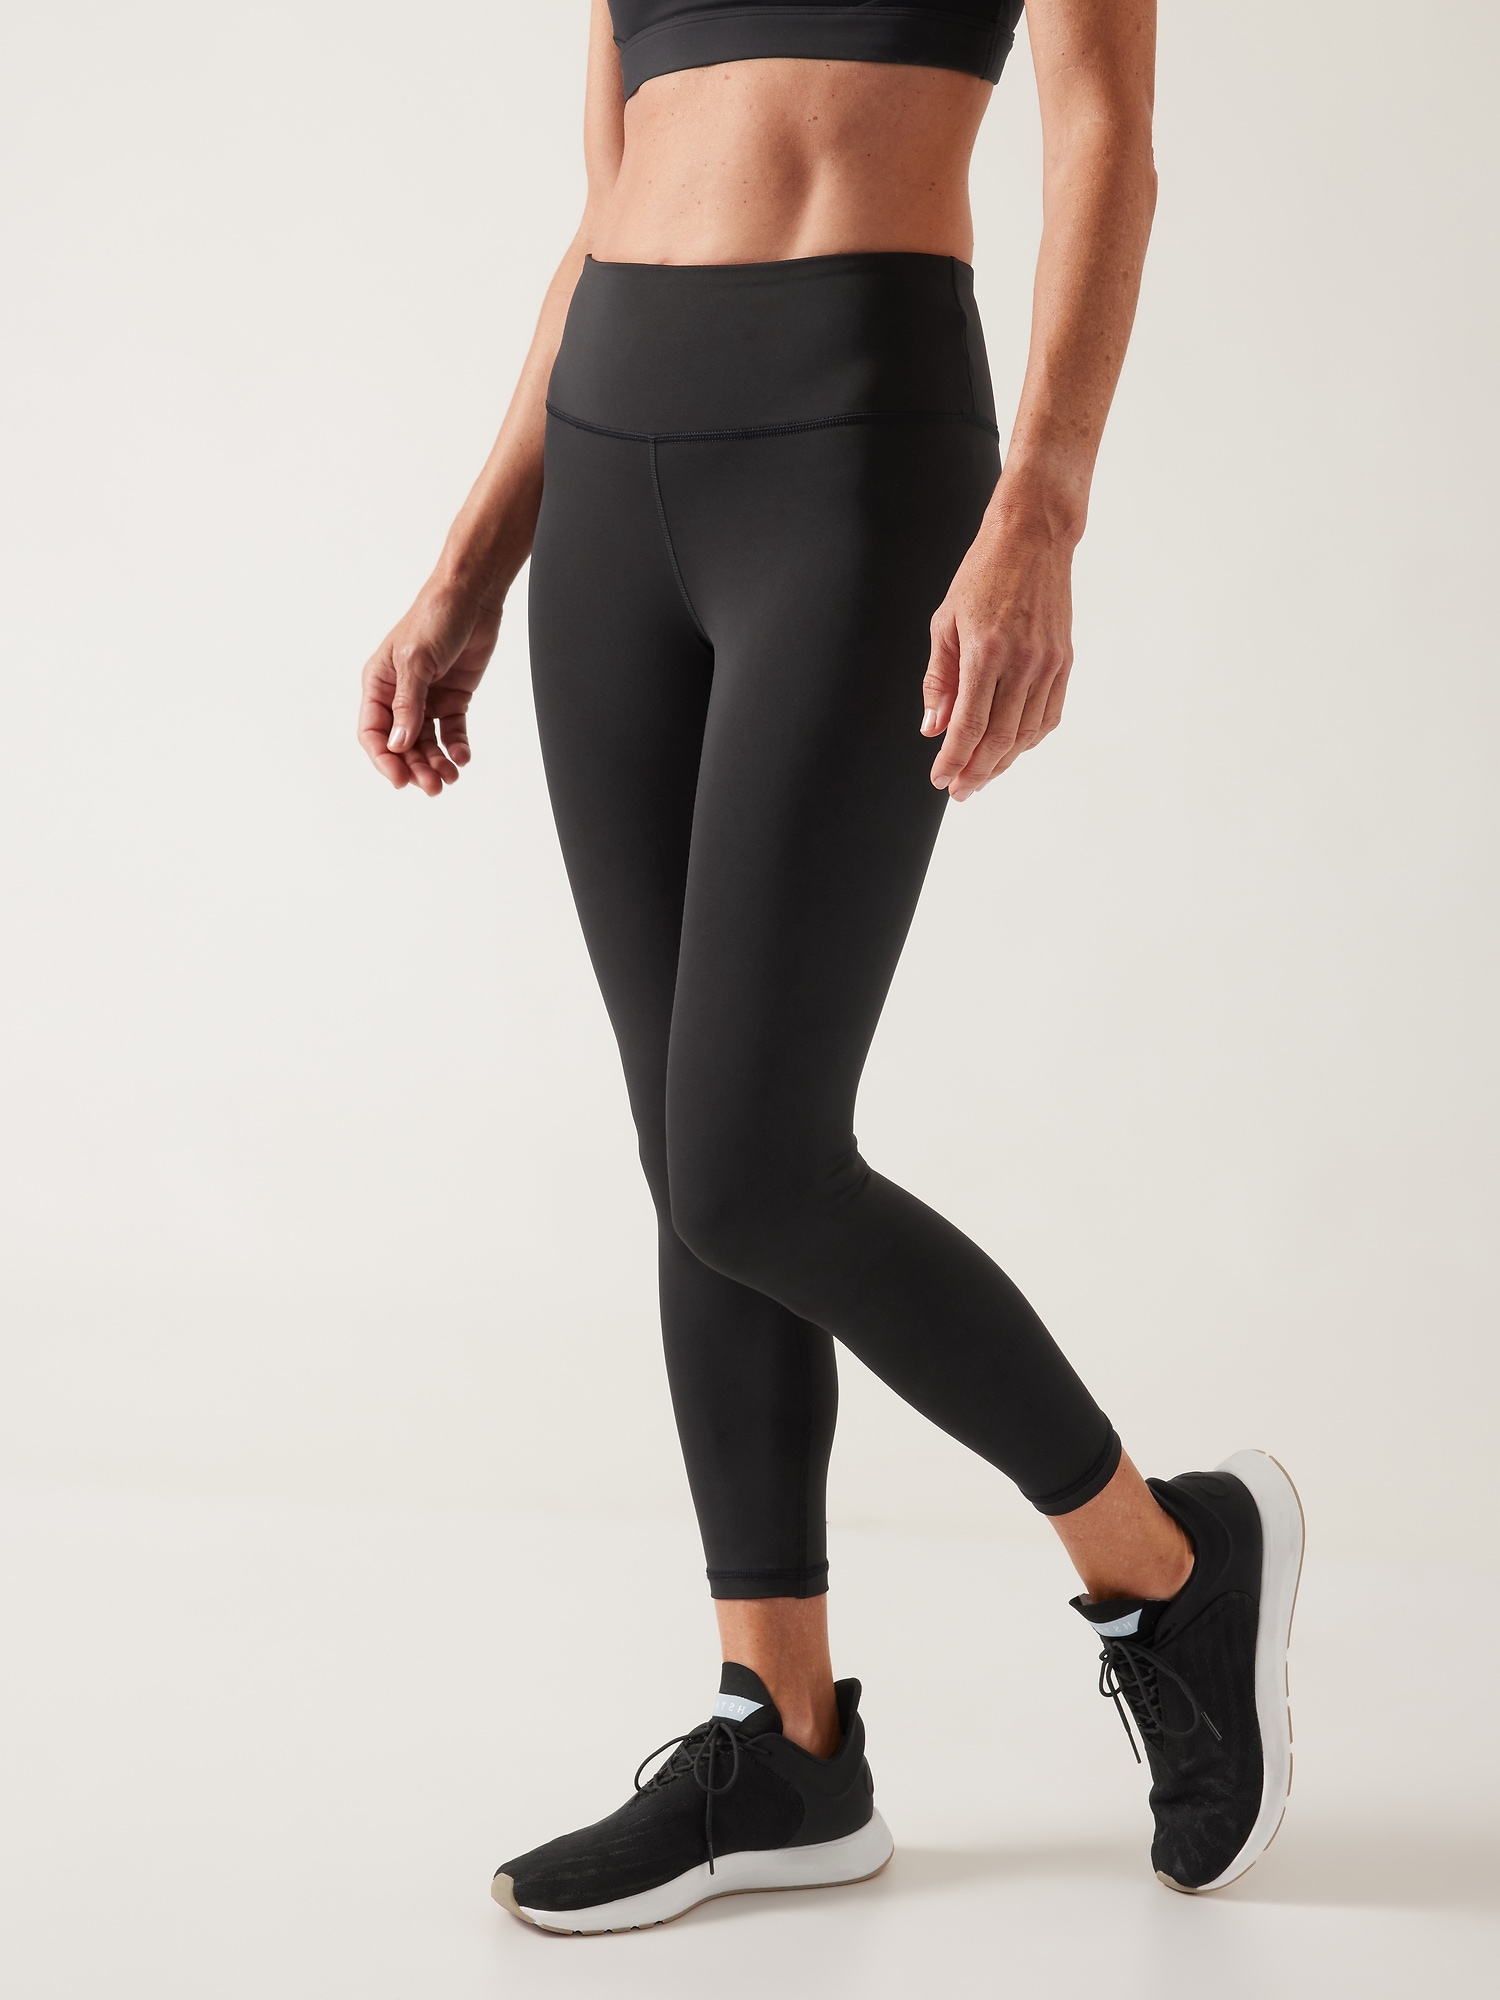 Women's Workout Tights